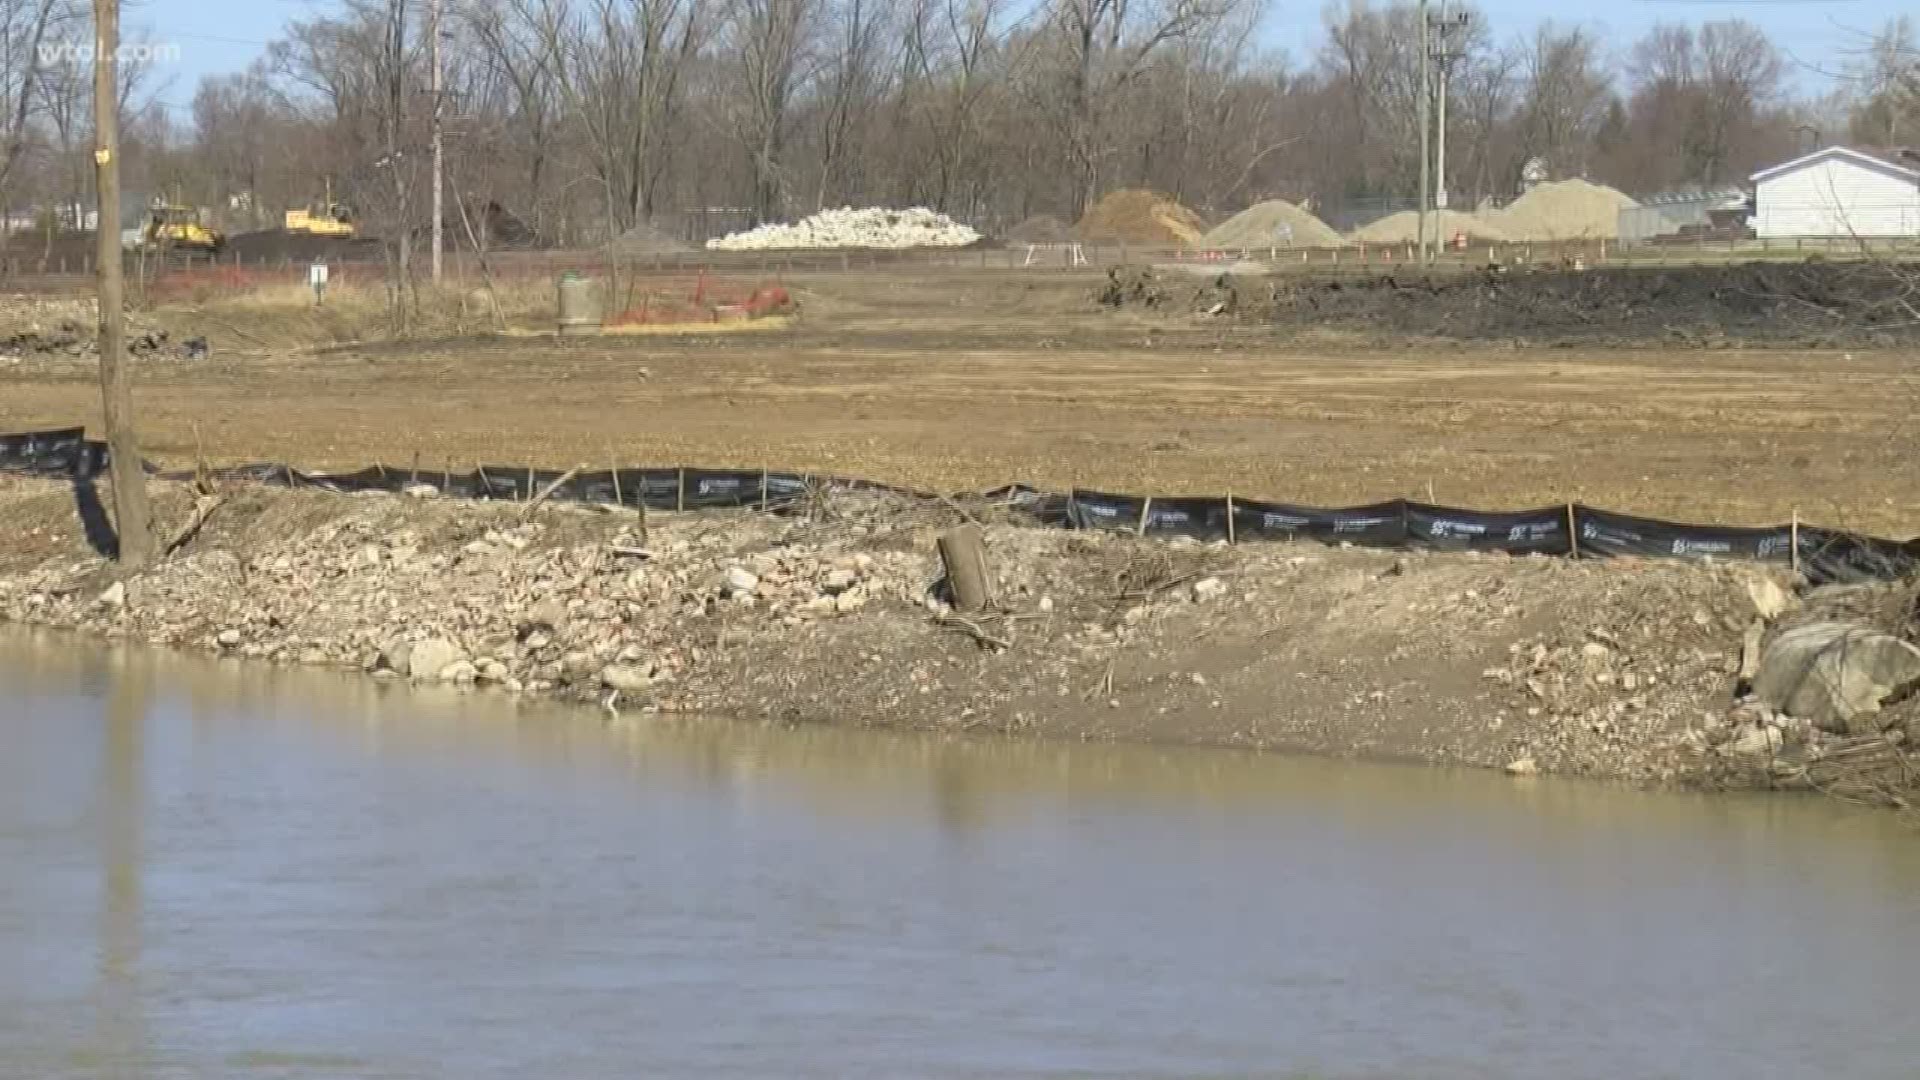 The Maumee Watershed Conservancy District began moving forward with the basin project since December